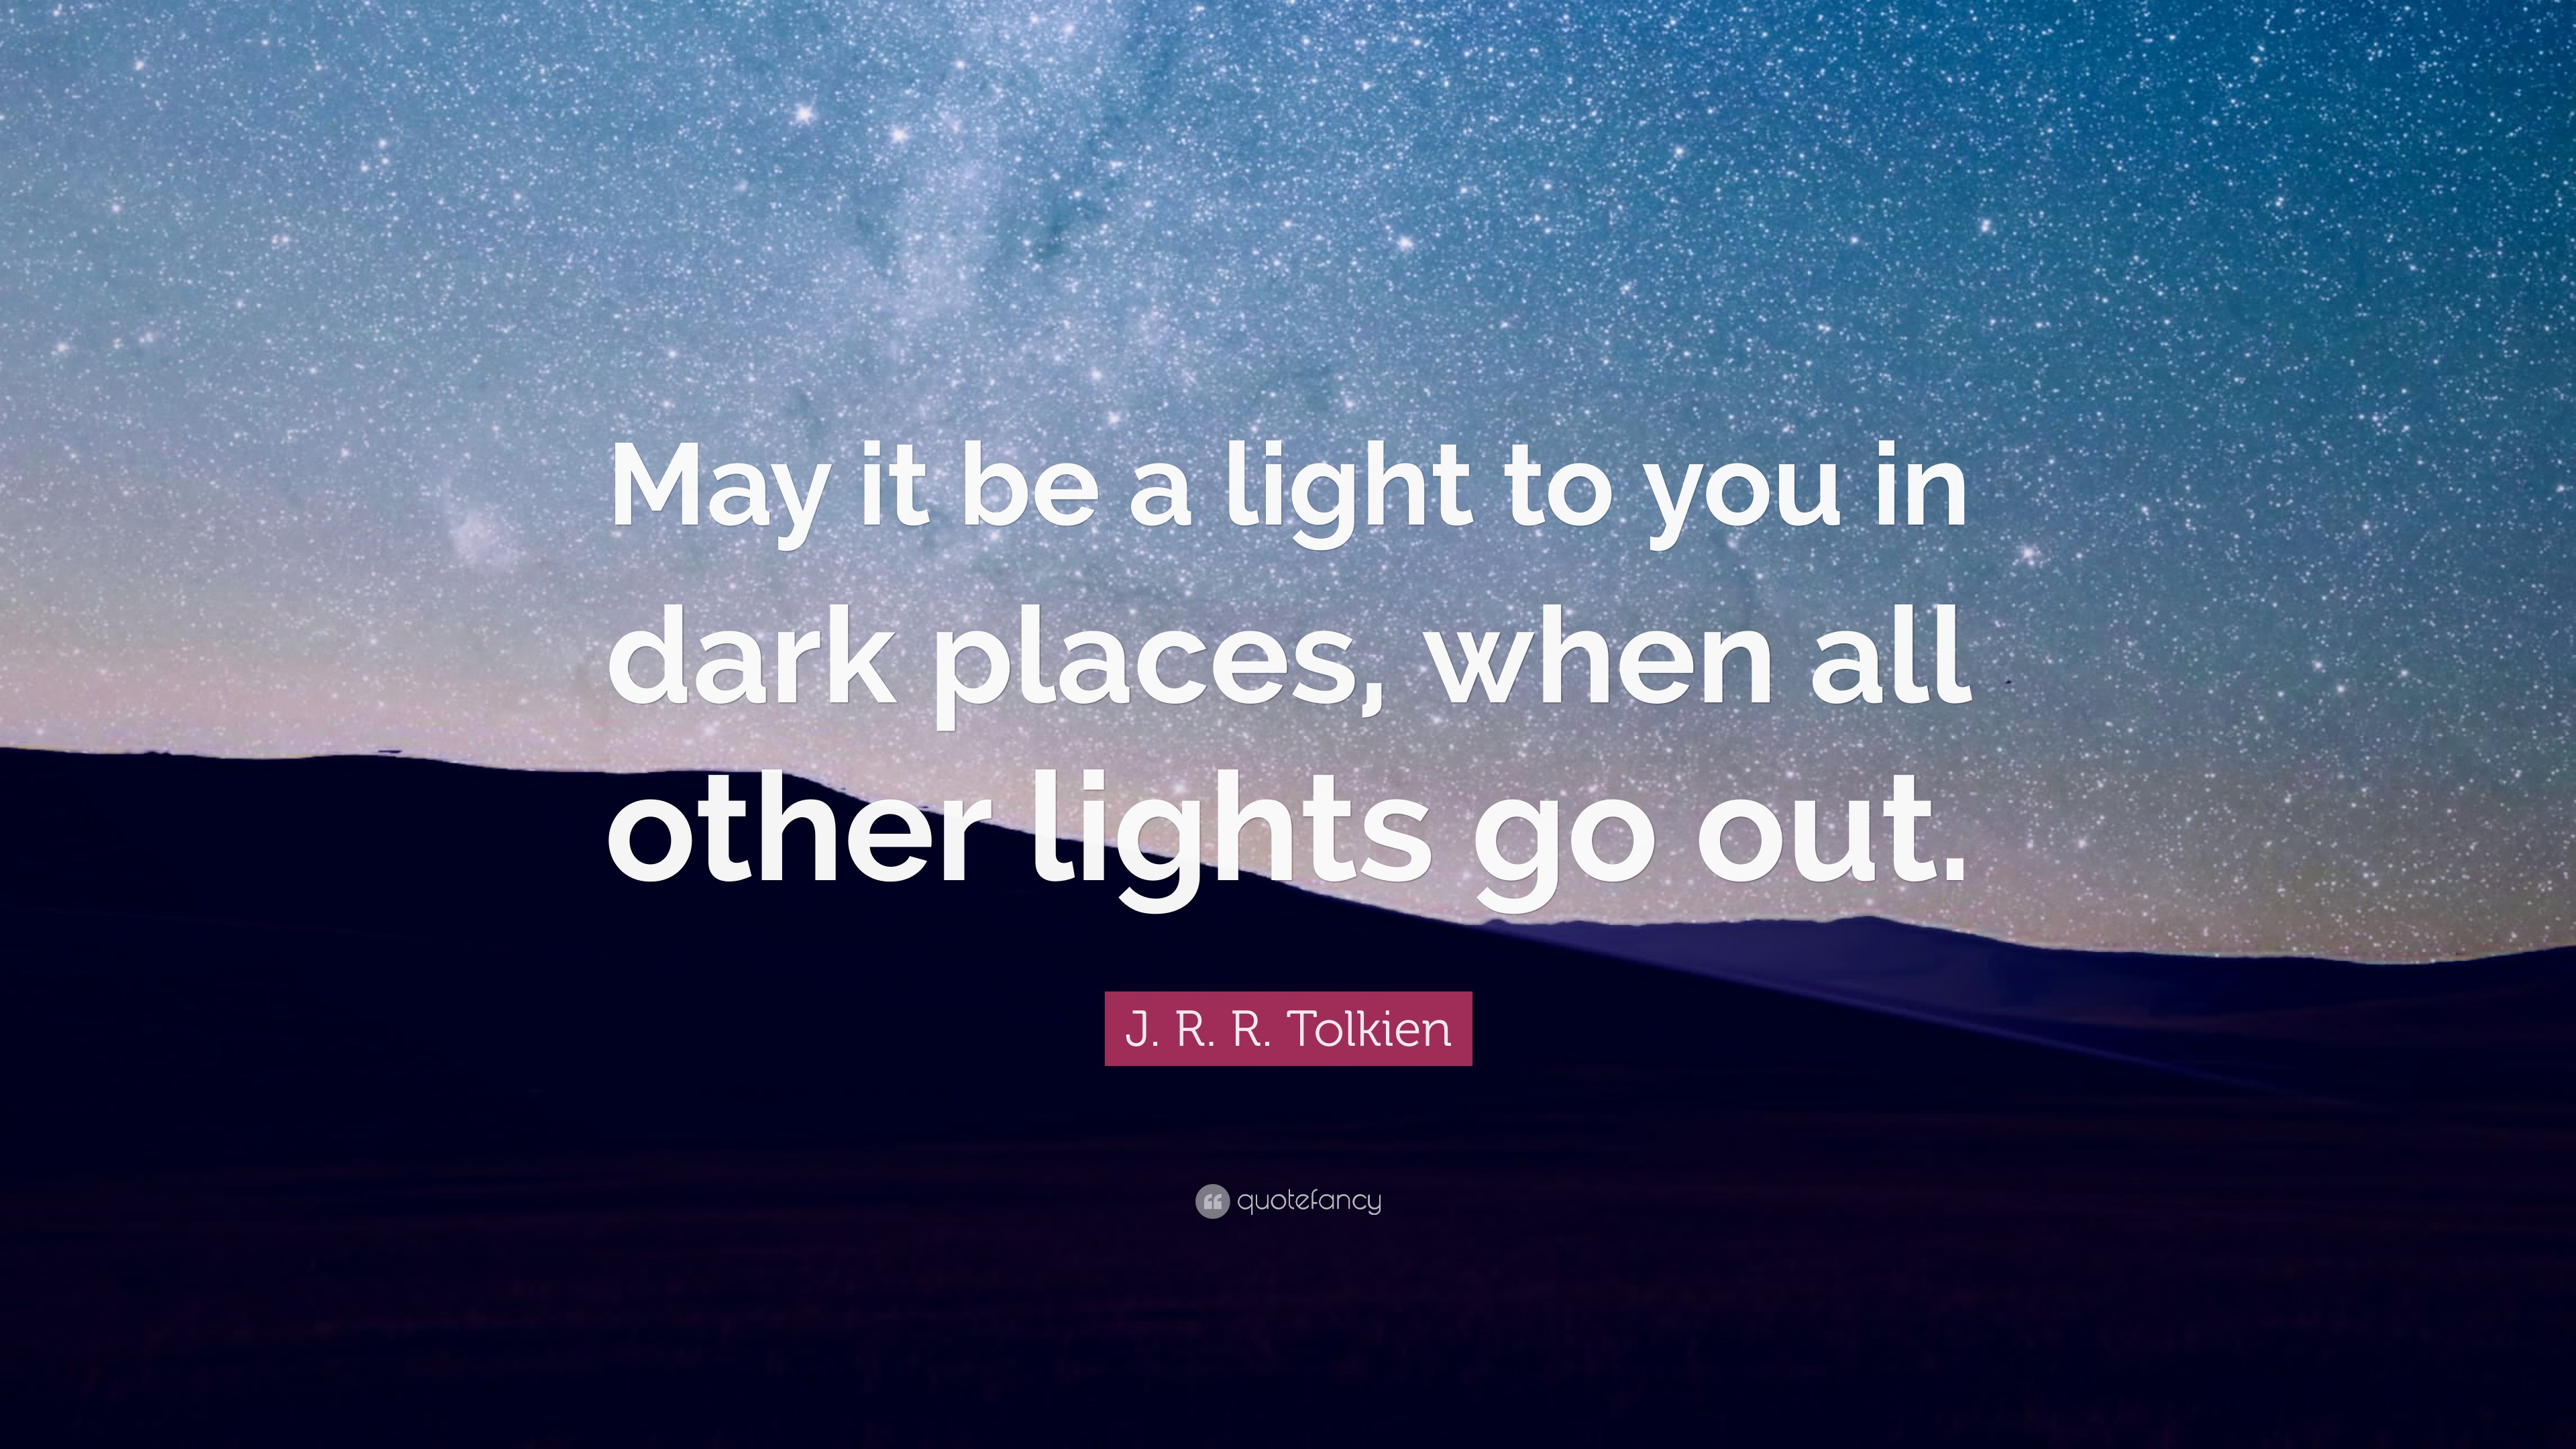 J. R. R. Tolkien Quote: “May it be a light to you in dark places, when